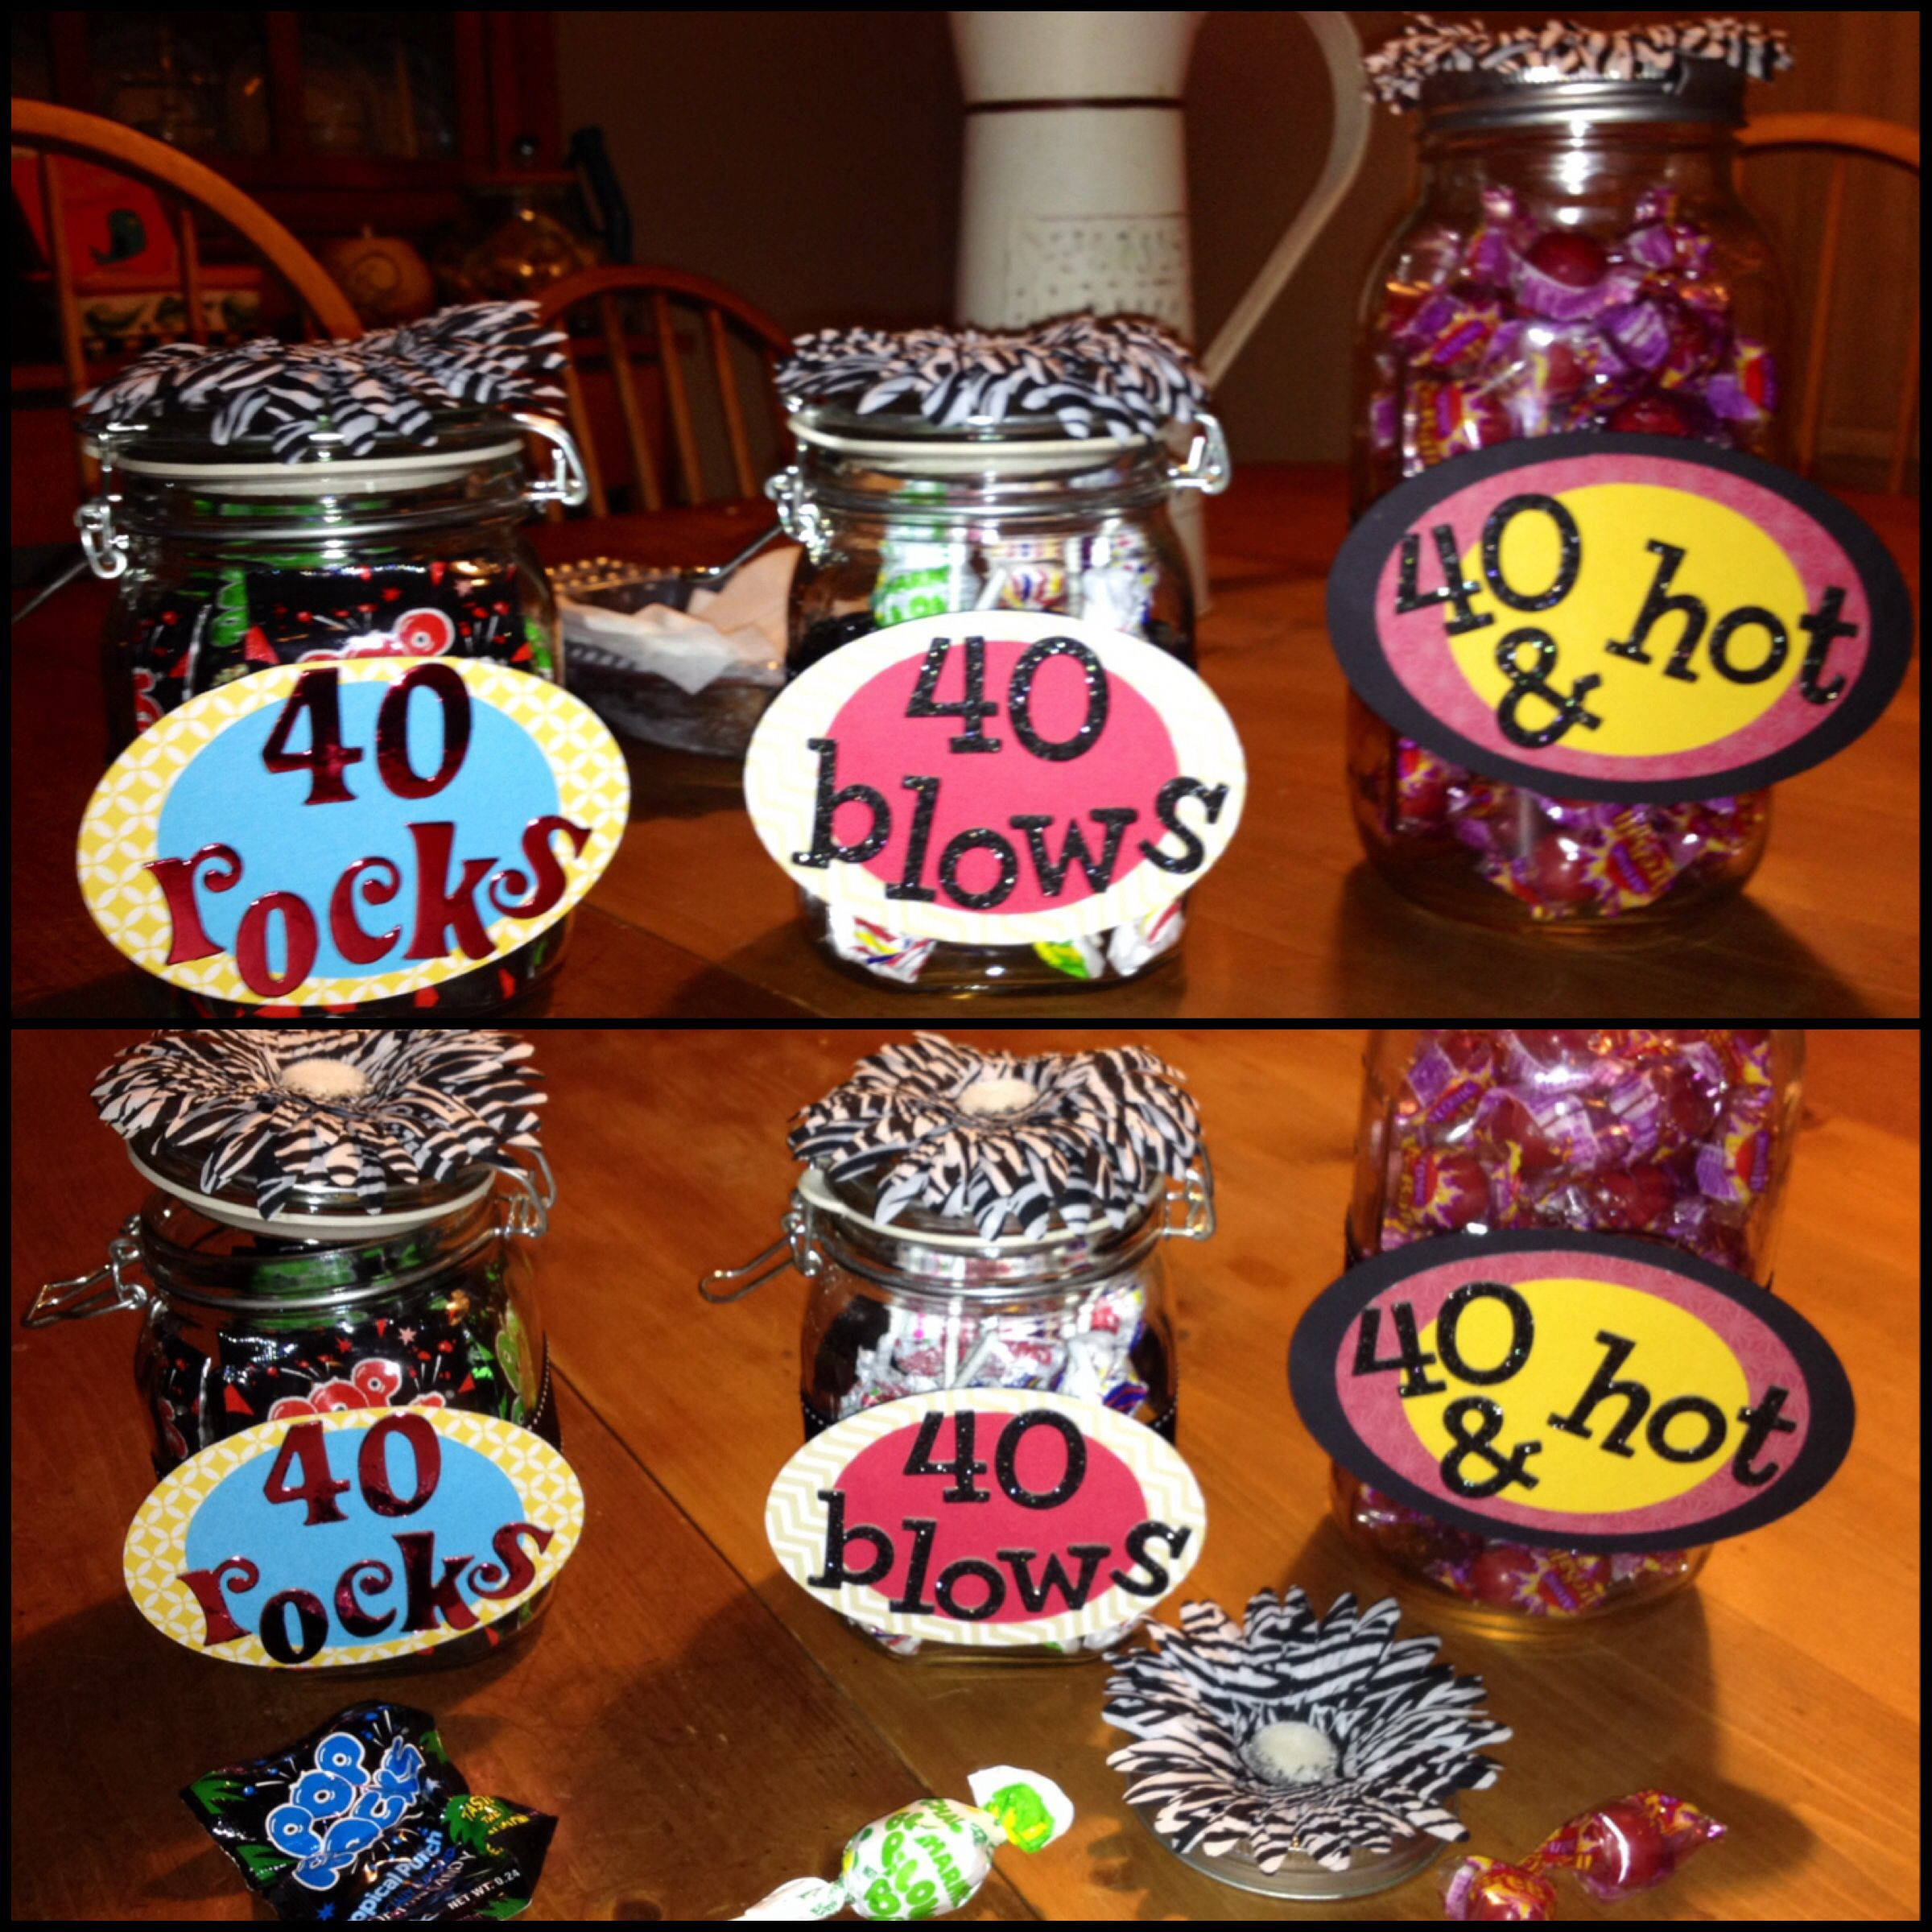 40th Birthday Party Favors
 My latest 40th birthday party favors for a BFF 40 Rocks